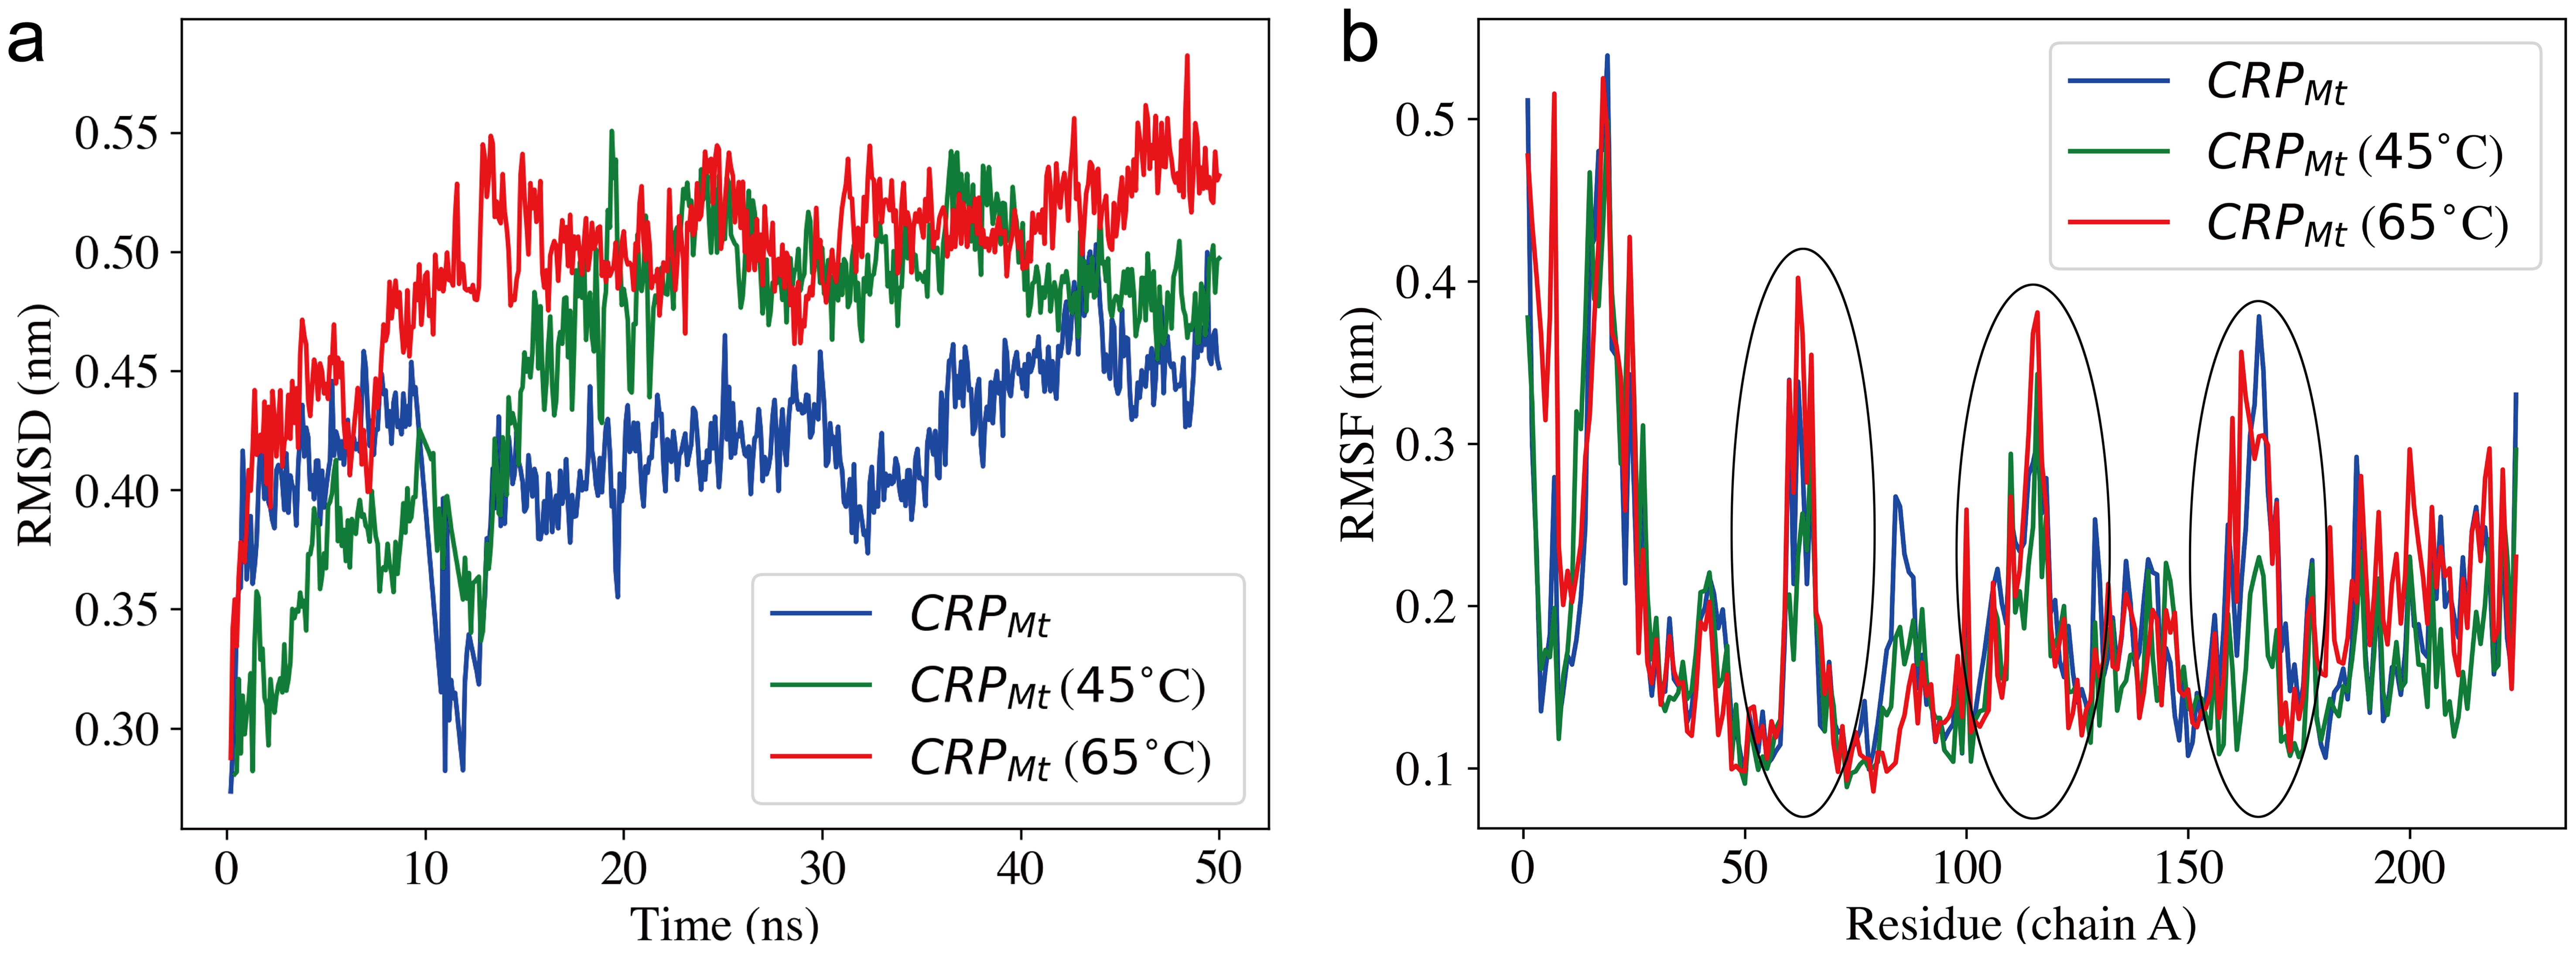 Structural deviations observed during simulations, comparing <italic>CRP<sub>Mt</sub></italic> at room temperature with the protein at two different temperatures (45 and 65°C), using (a) Root mean square deviations (RMSD) vs. time (shows the overall structural deviations) and (b) Root mean square fluctuations (RMSF) for each residue in chain A.